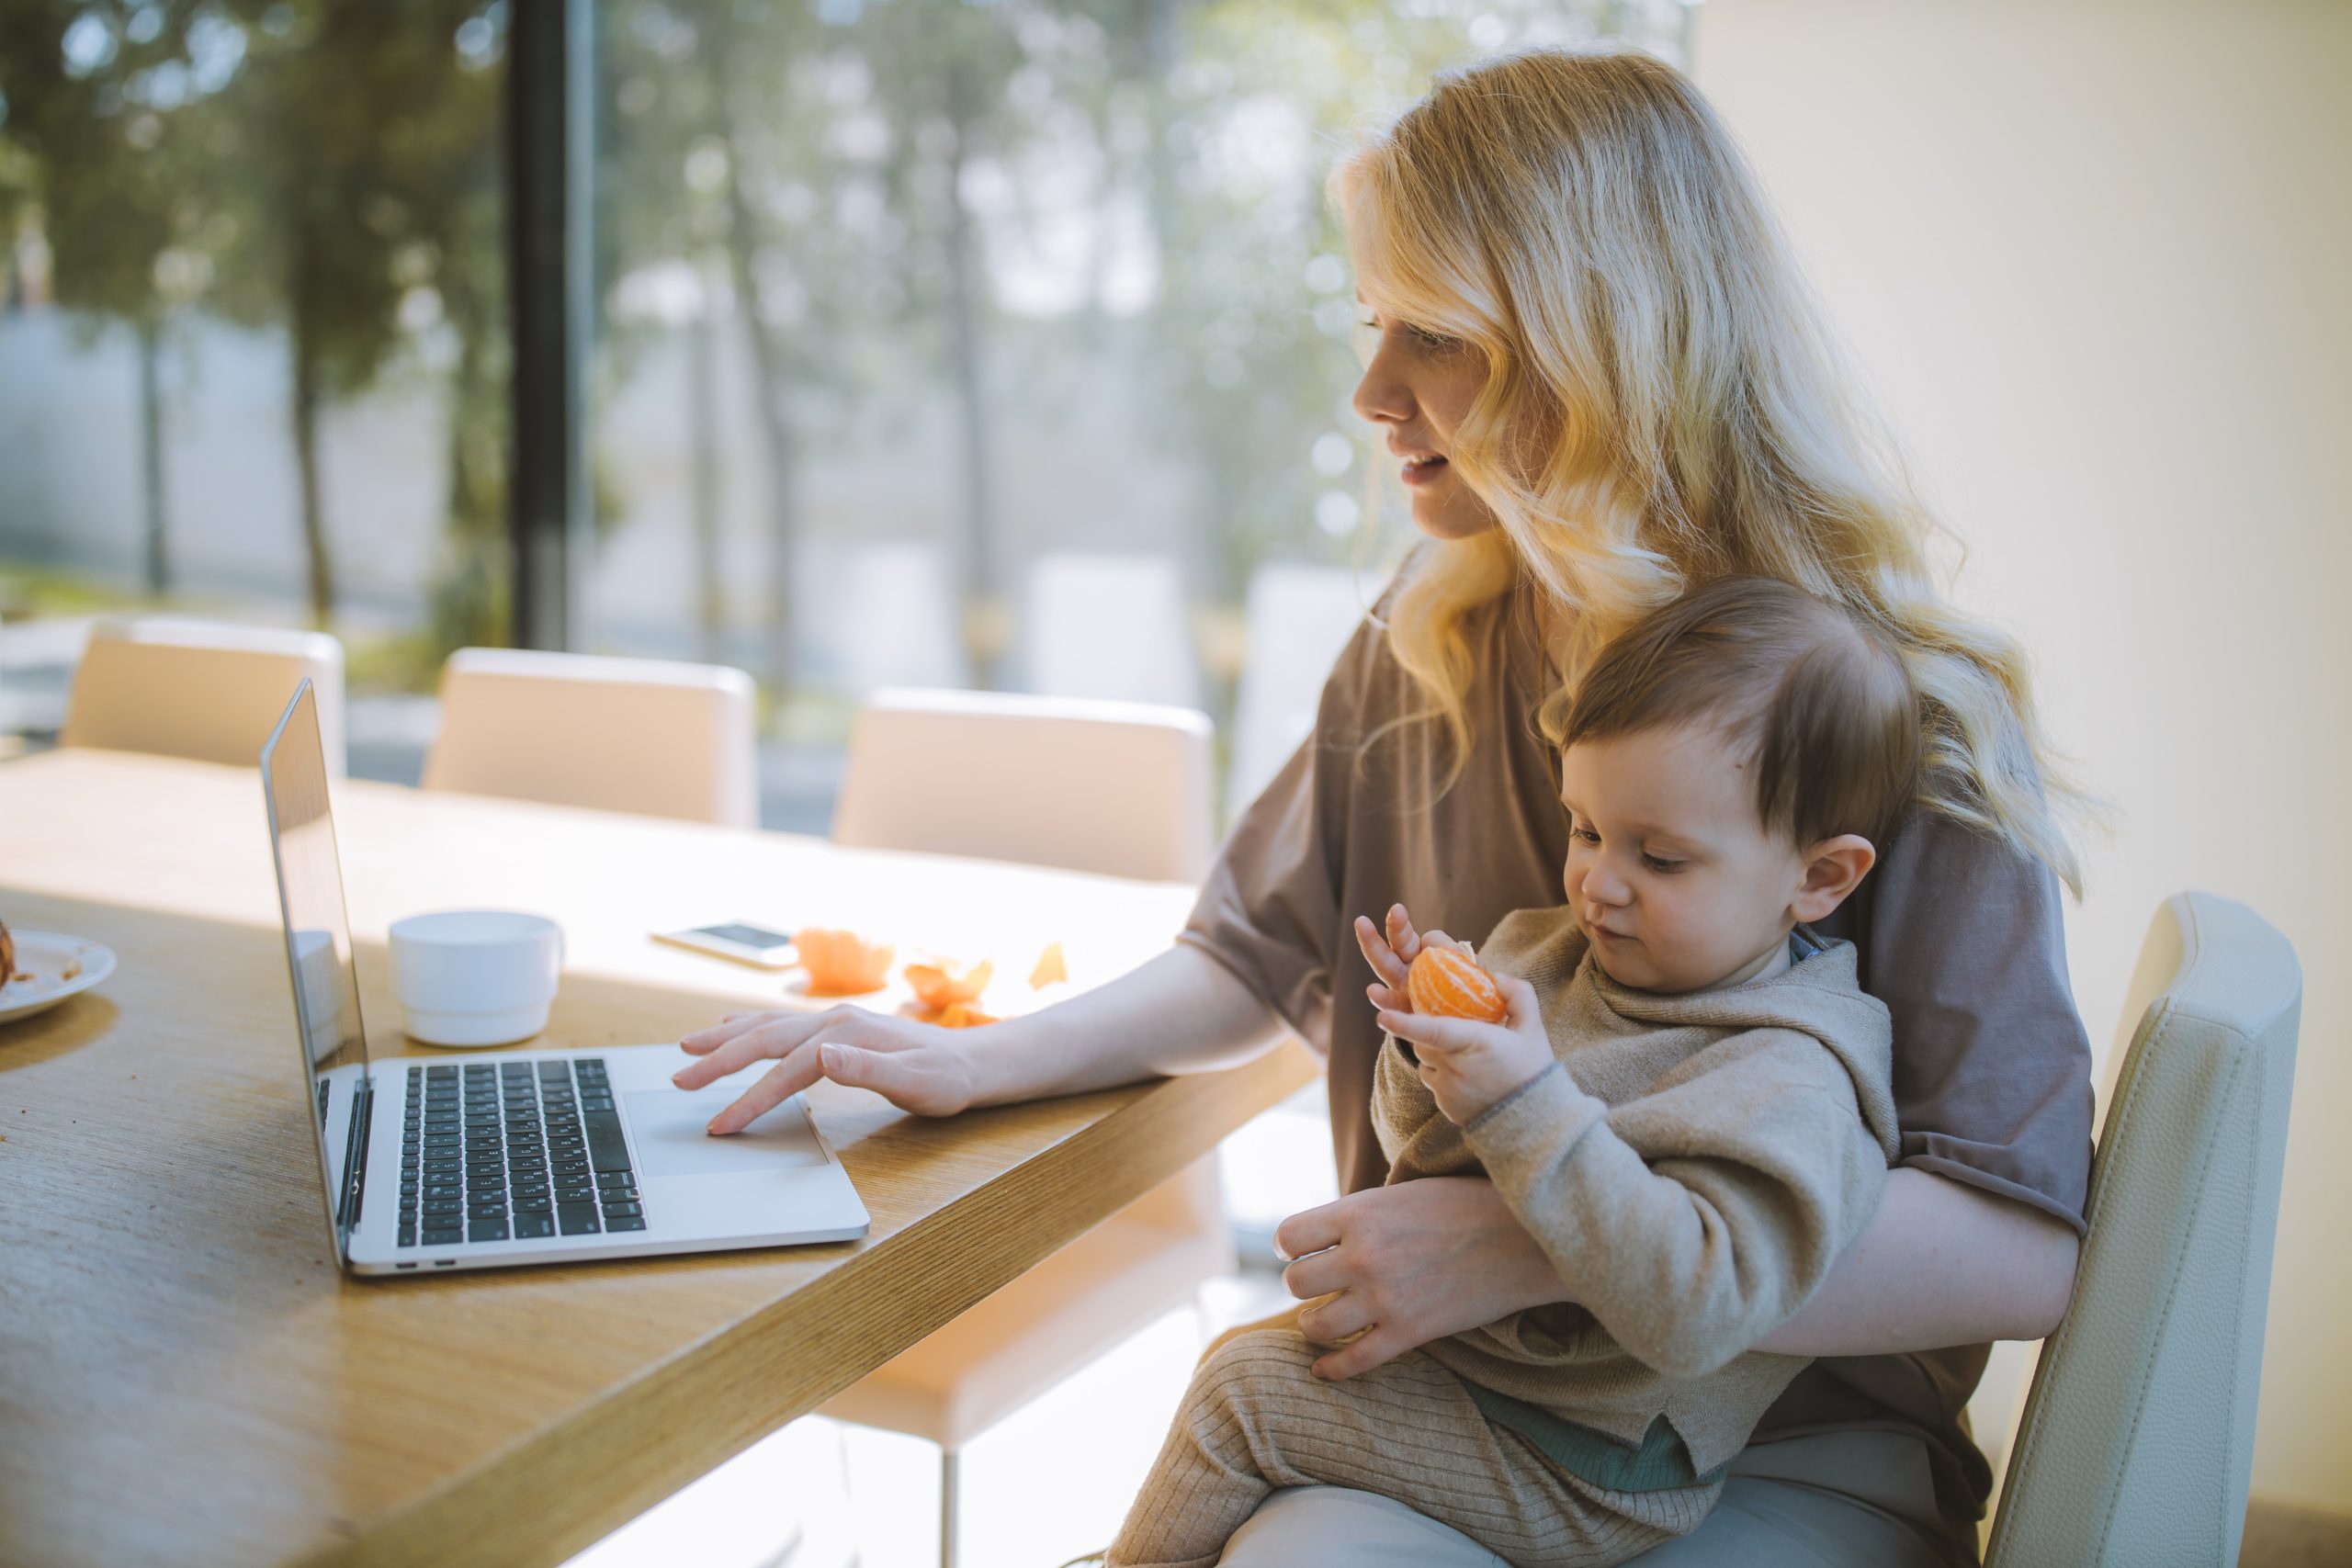 Employees Working From Home? How To Stay Flexible and Innovative